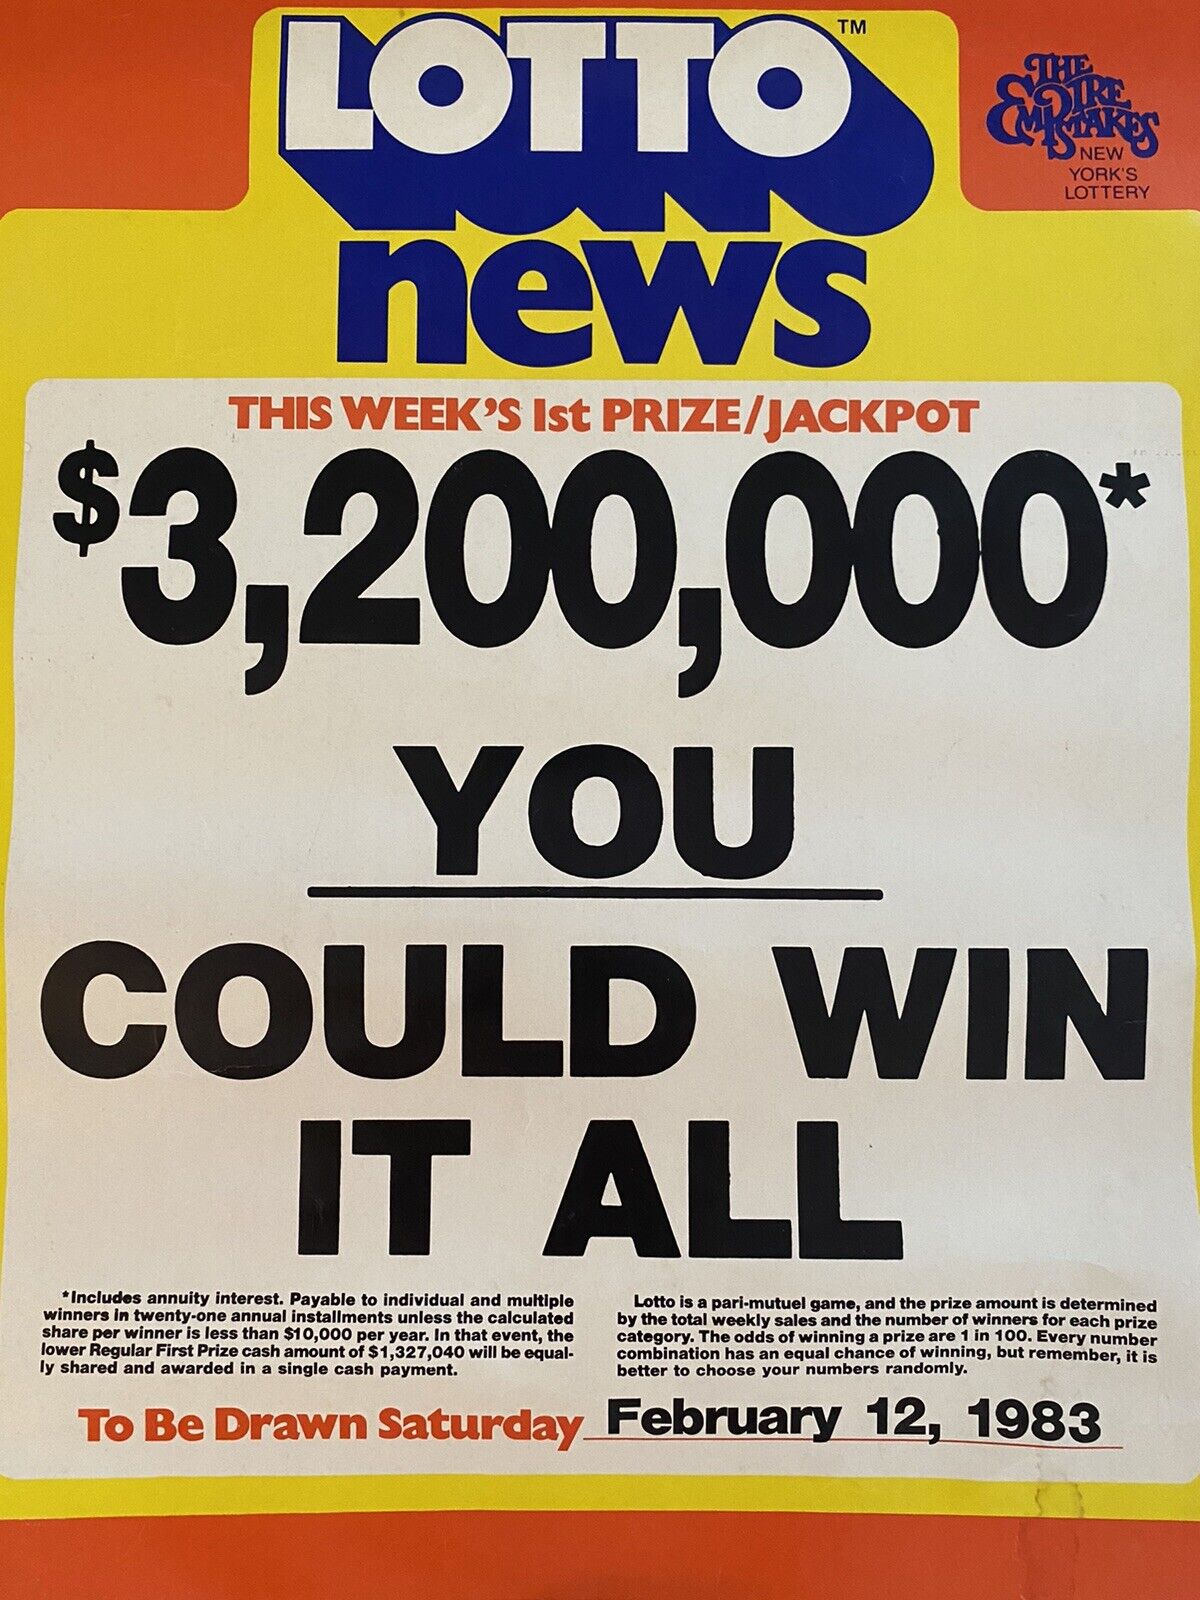 Vtg New York State Lottery sign February 12 1983 $3,200,000 Could win it All